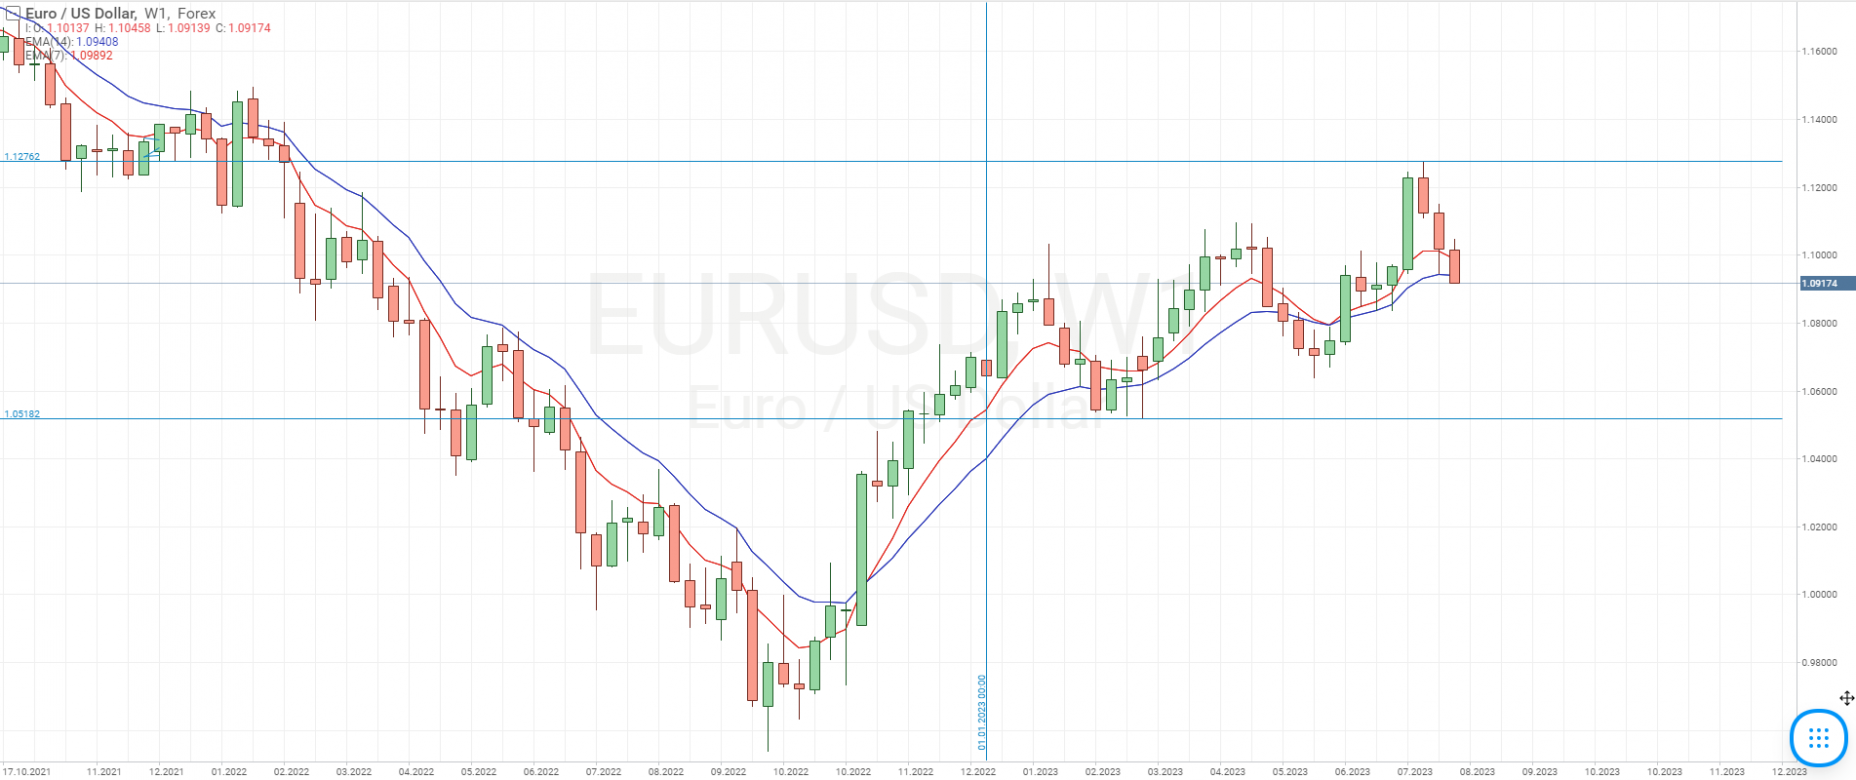 EUR/USD currency pair chart